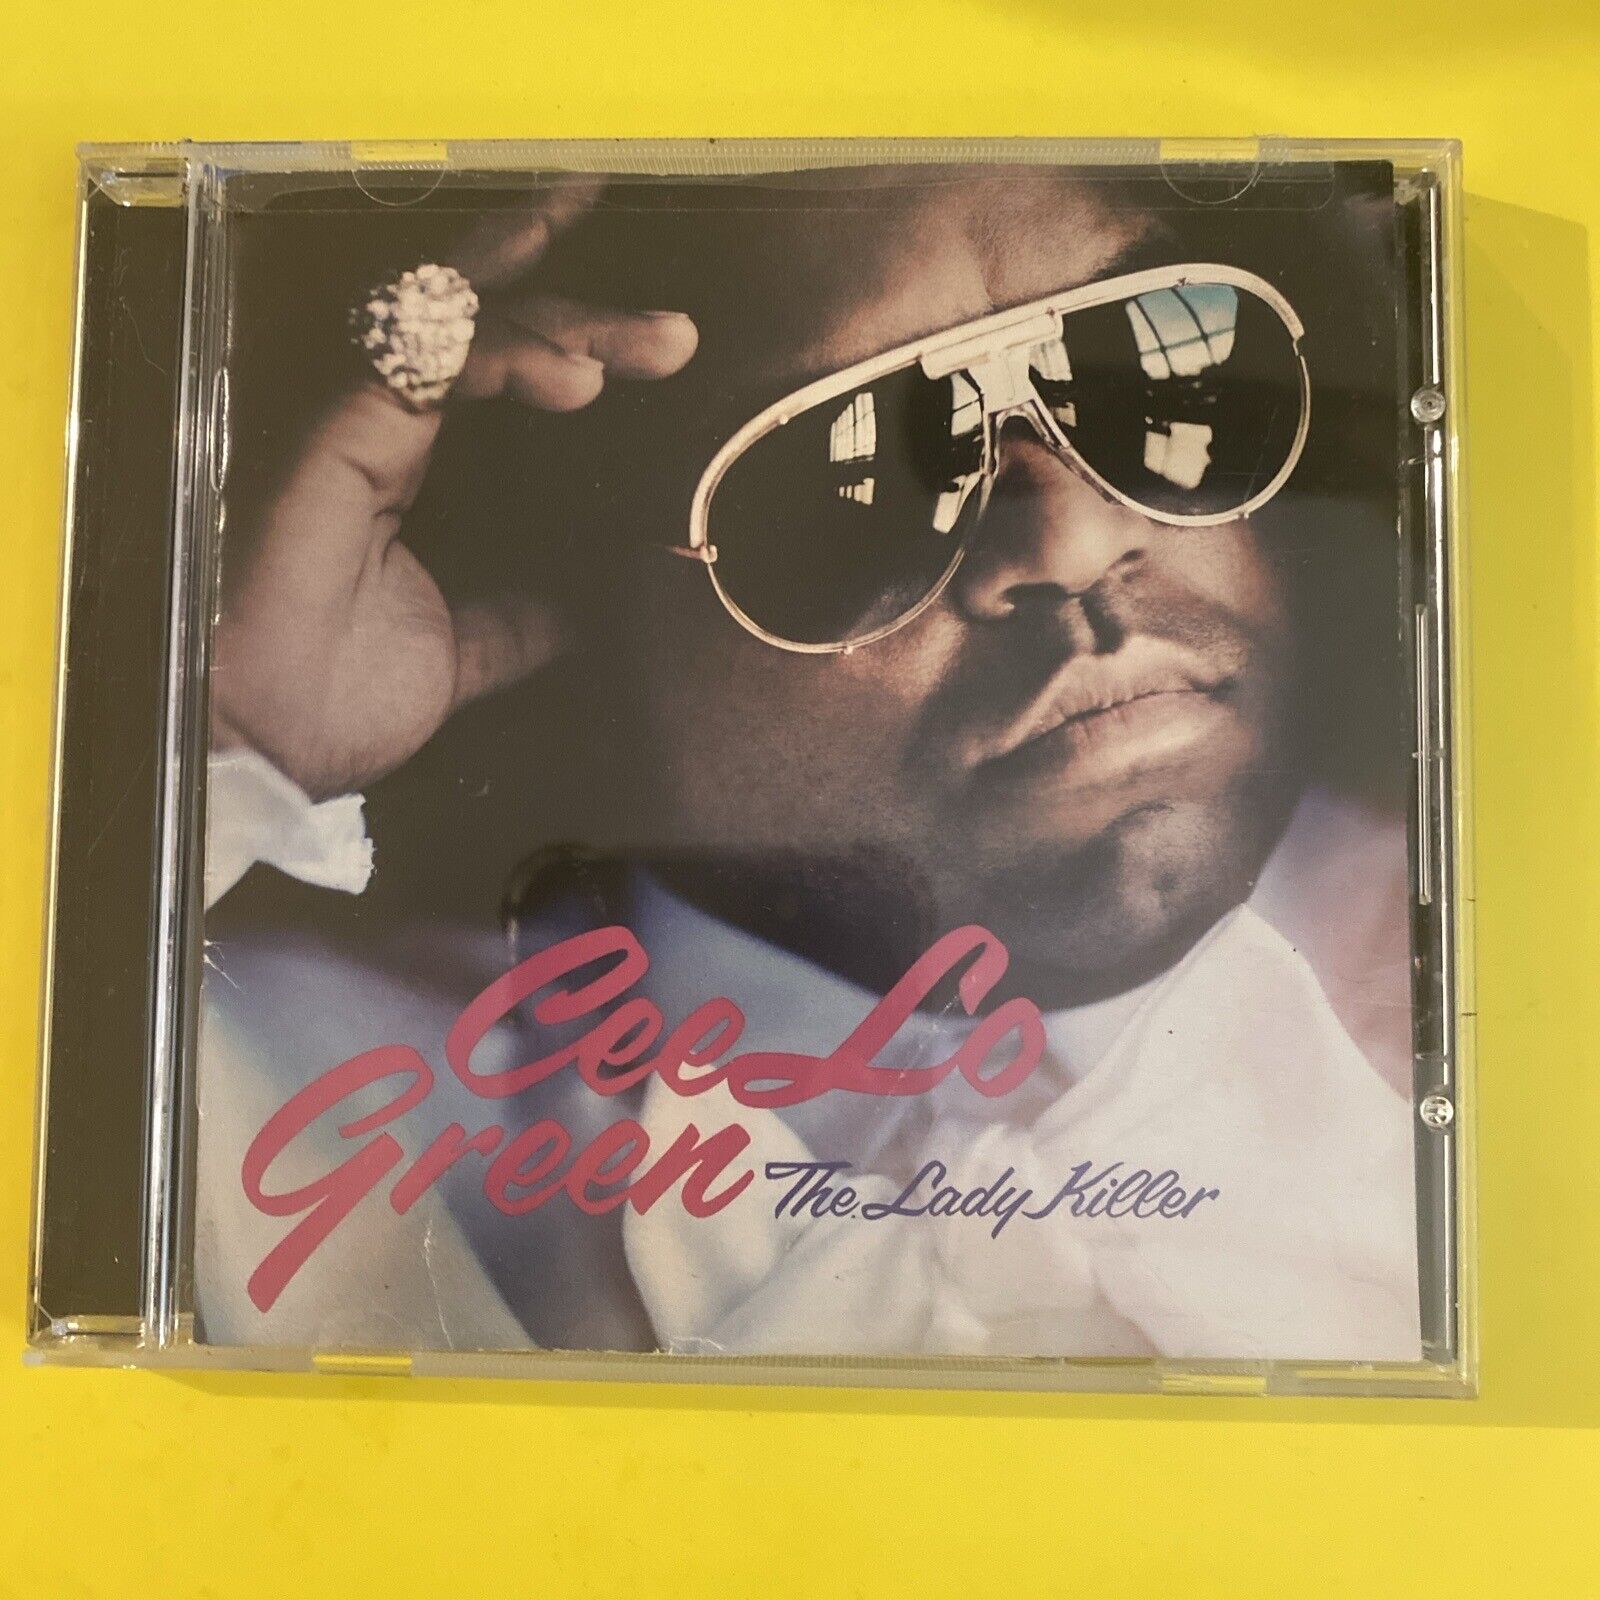 CEE LO GREEN  THE LADY KILLER (CD 2010) LIKE NEW CONDITION - FAST FREE SHIPPING